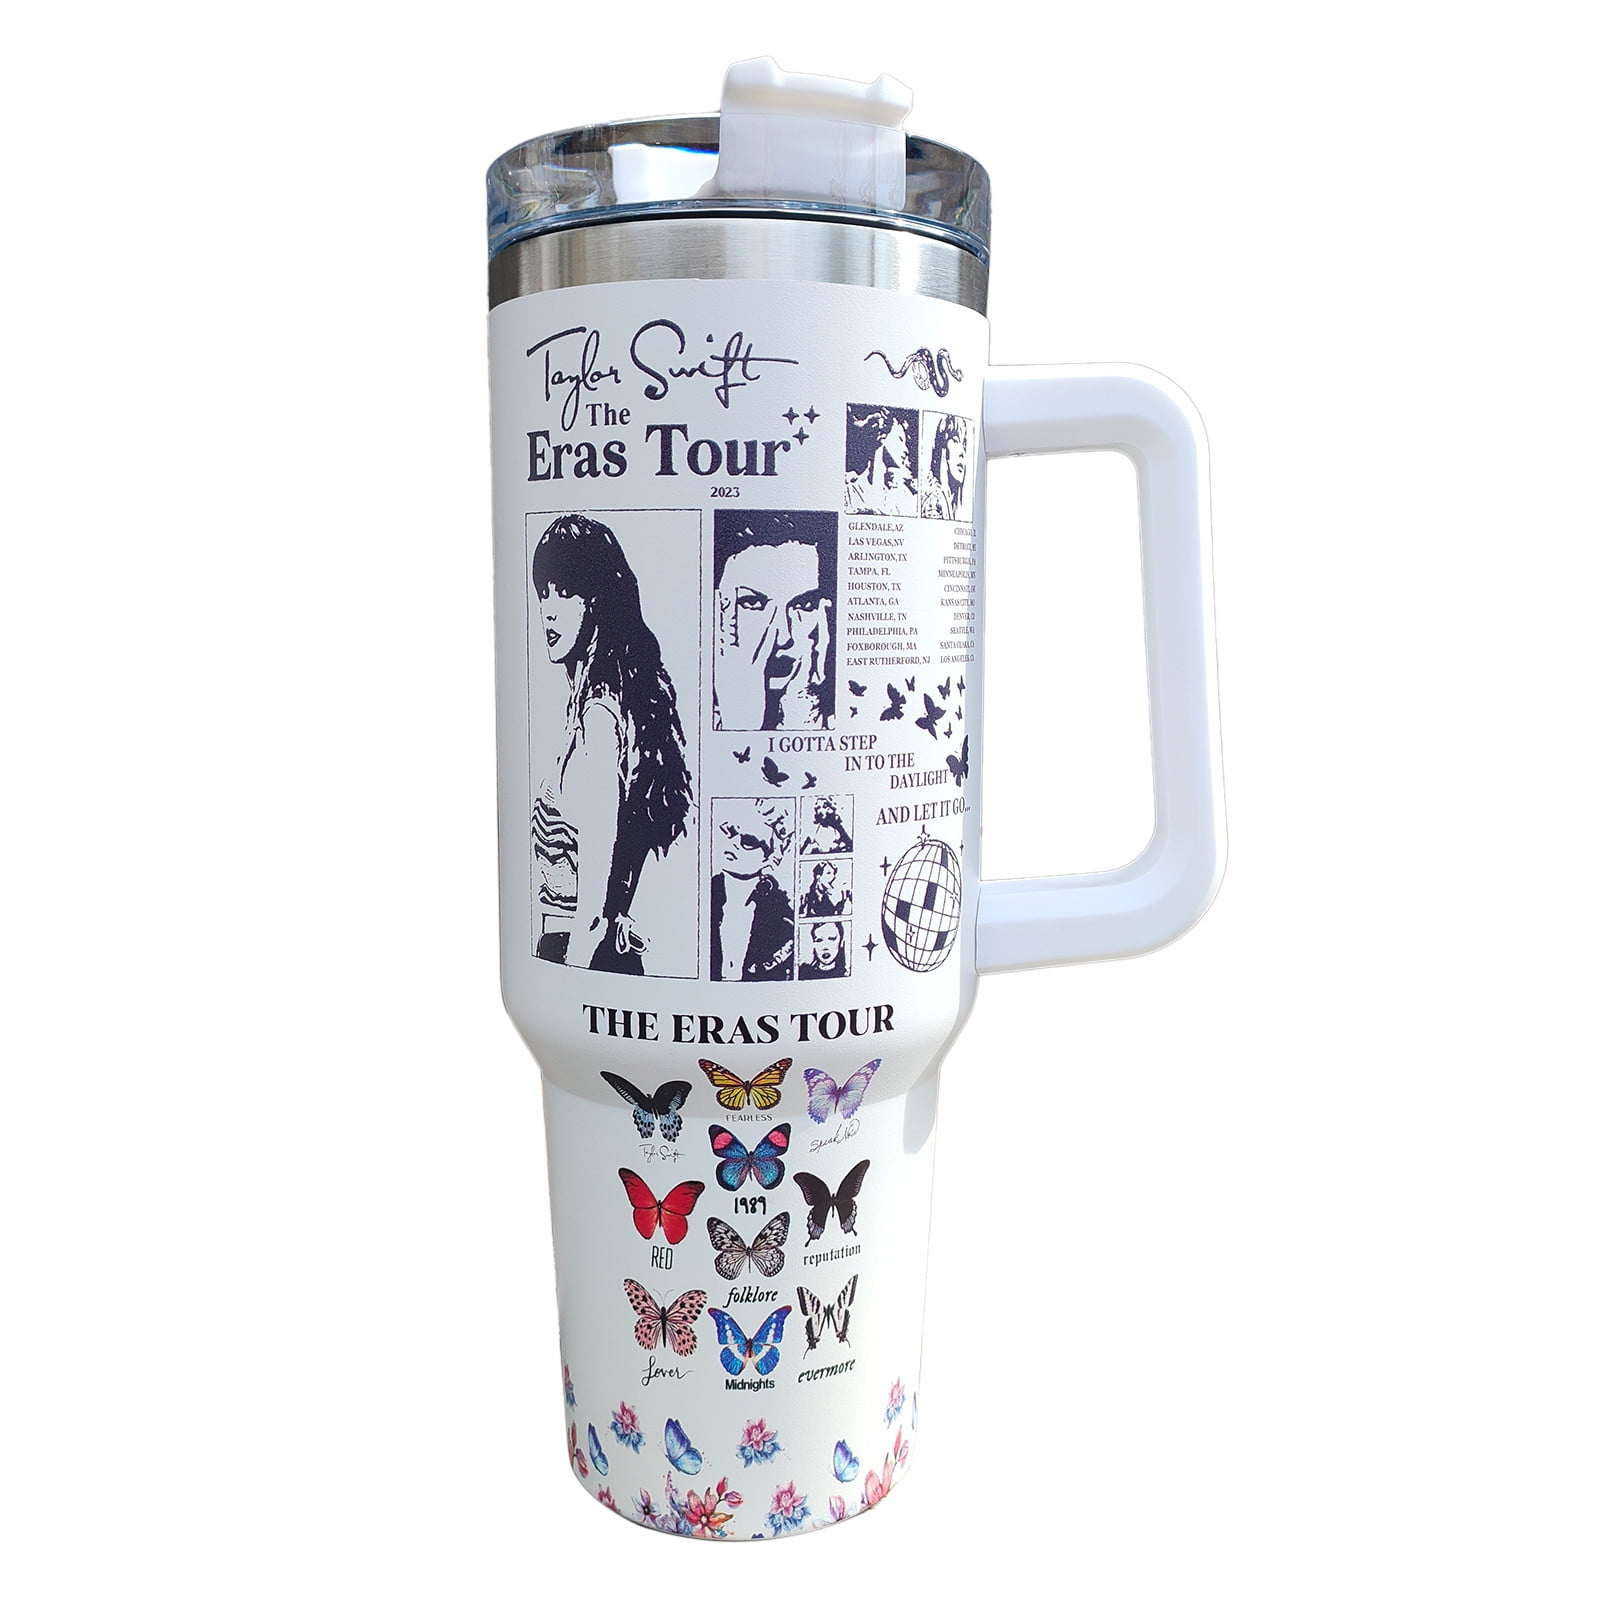 Strong Fearless Patient Mom 40oz Sublimation Tumbler Design